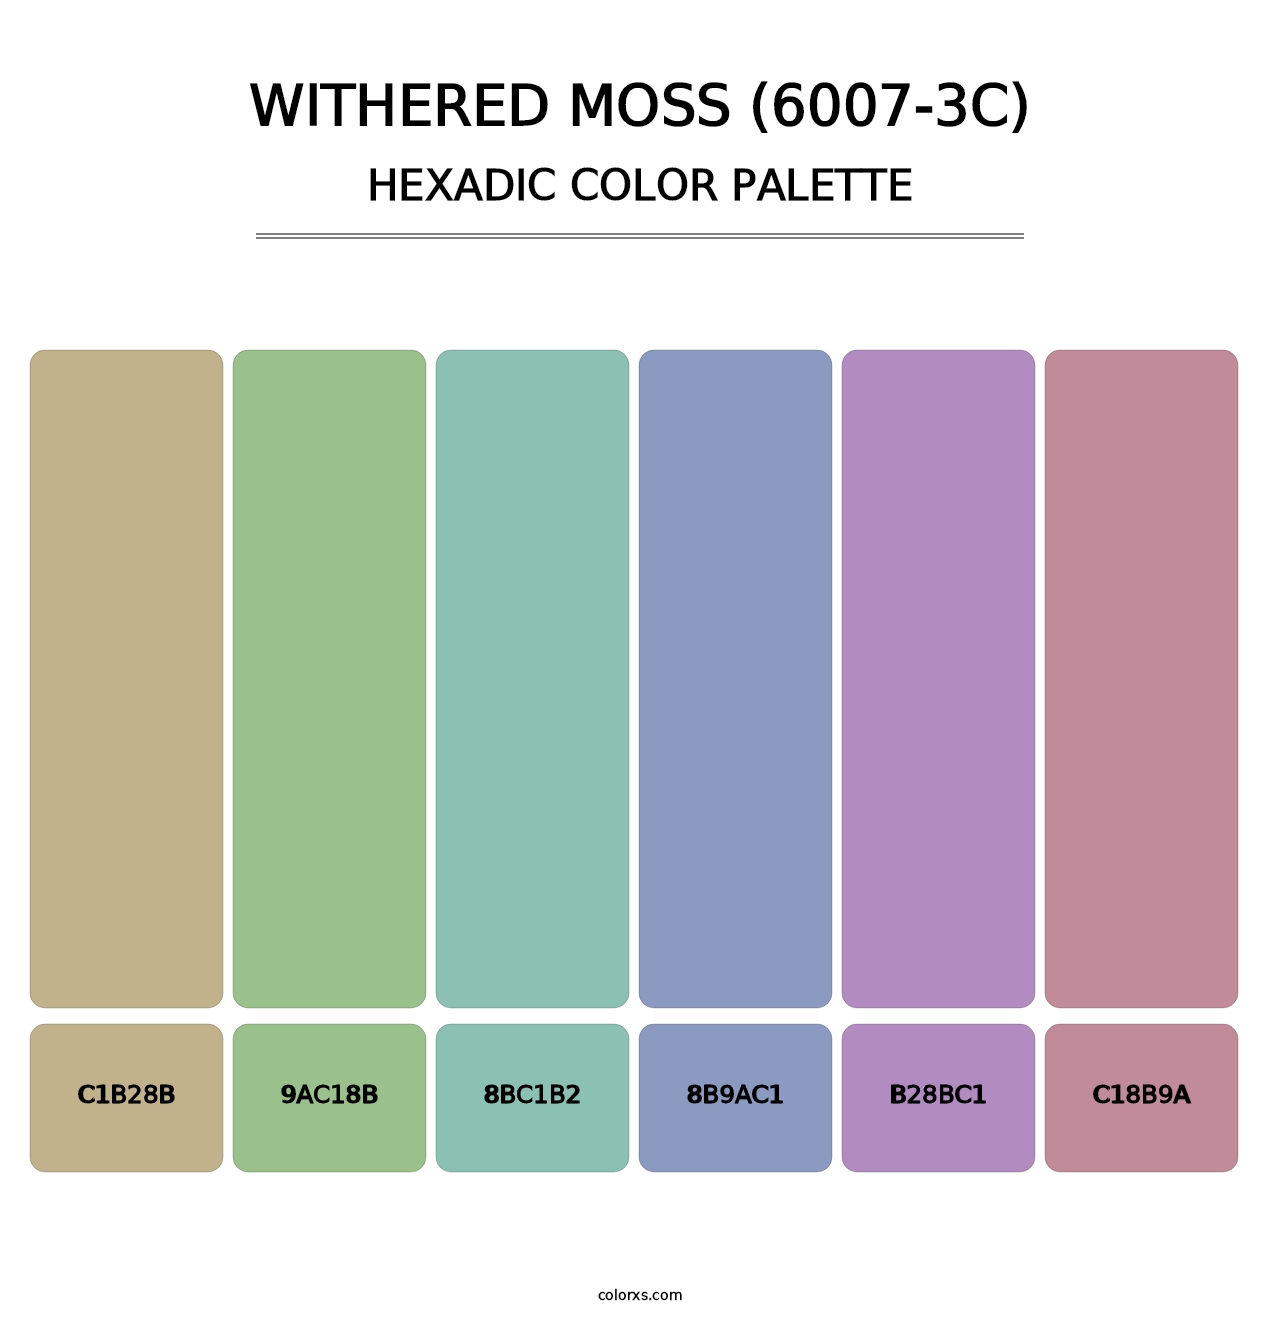 Withered Moss (6007-3C) - Hexadic Color Palette